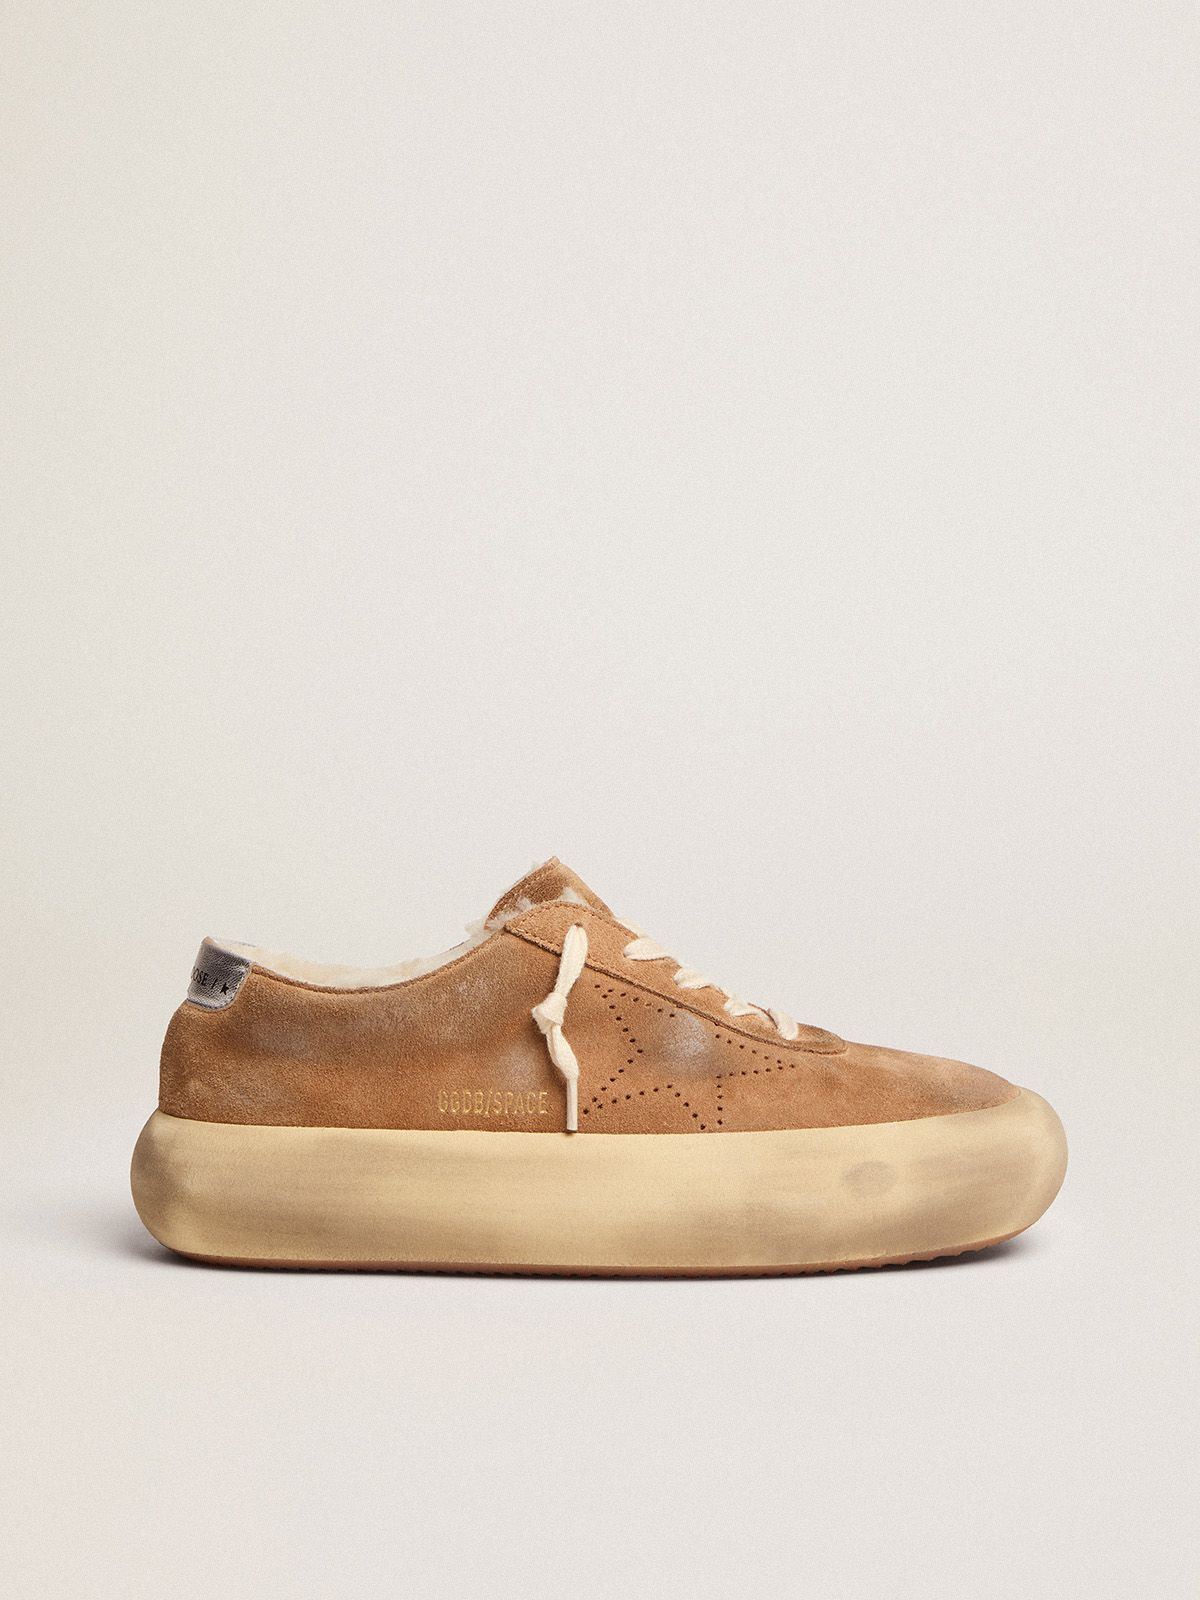 golden goose tobacco-colored shoes with suede shearling Space-Star in lining